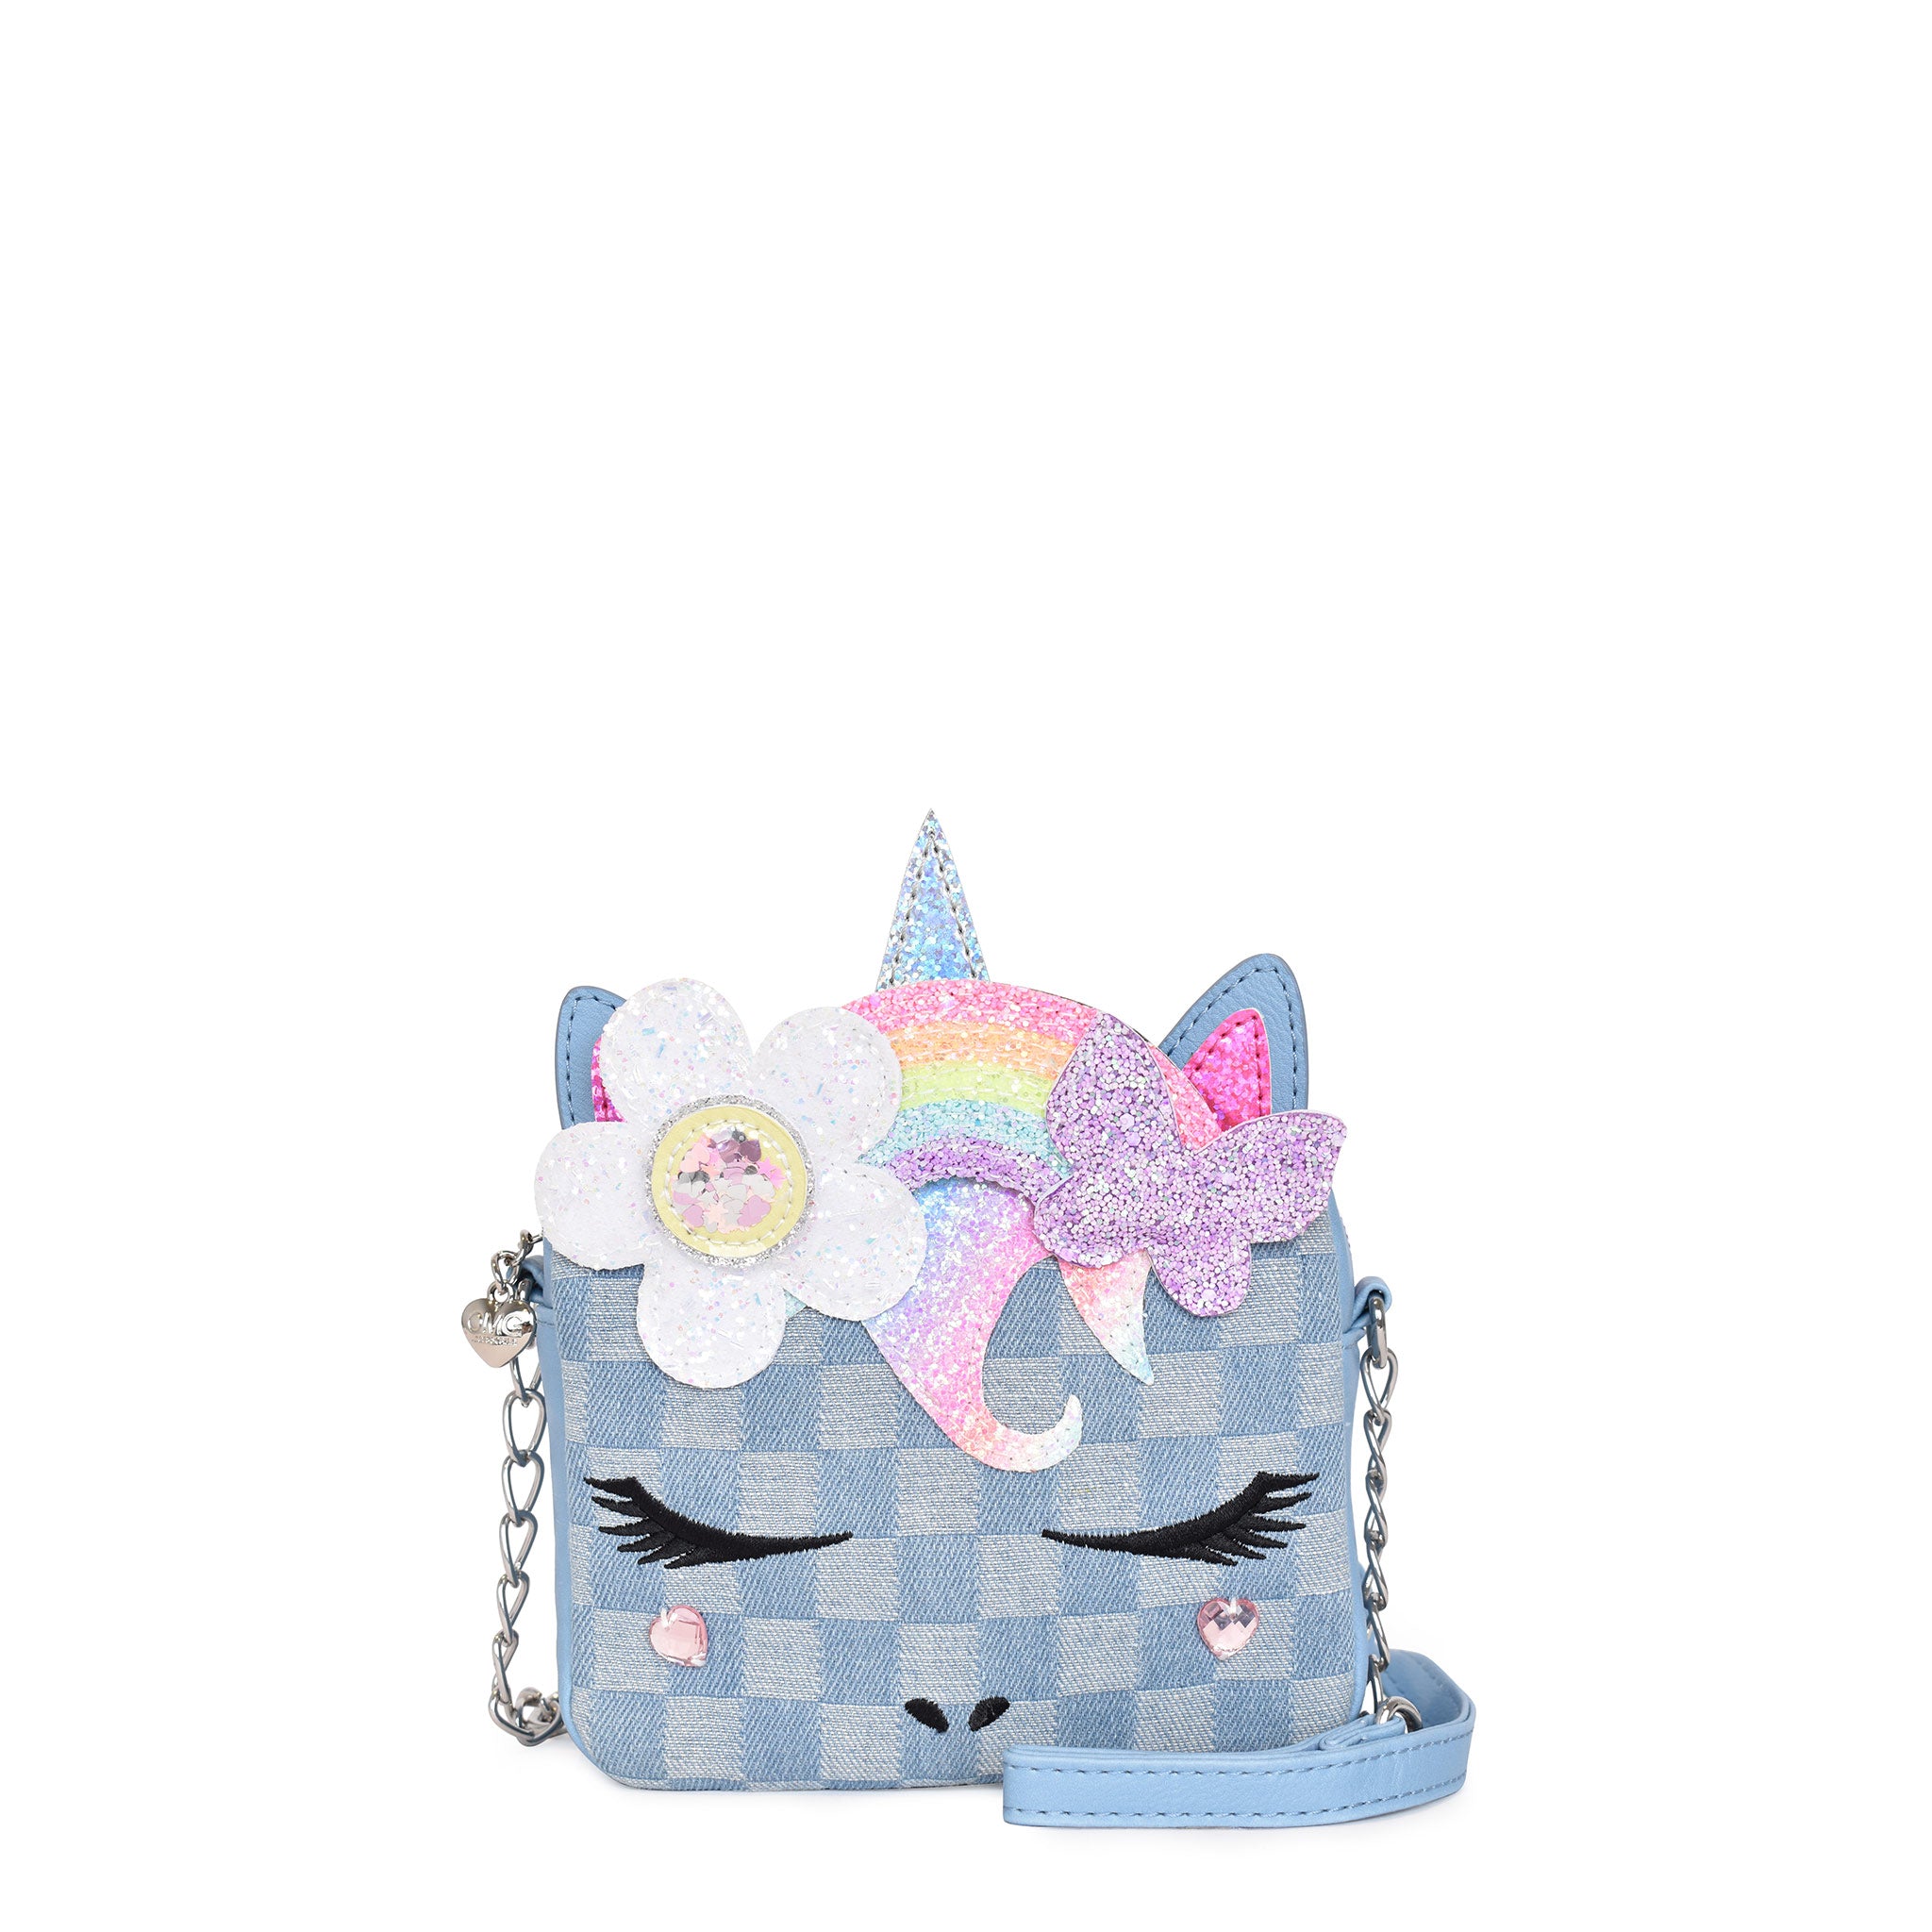 Front view of a denim checkerboard print unicorn face crossbody with a glitter daisy rainbow crown.